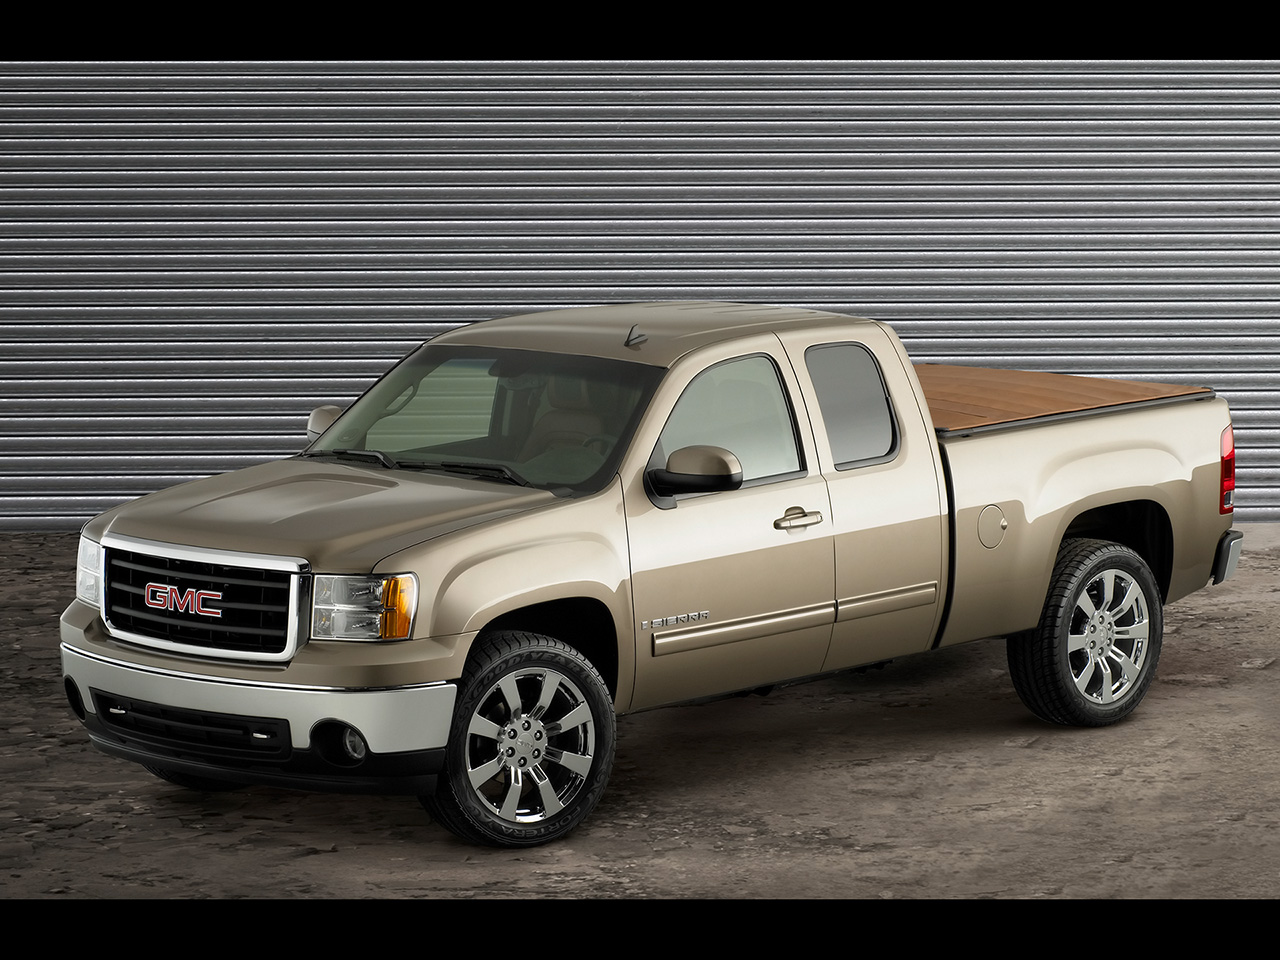 gmc sierra 1500 extended cab-pic. 1